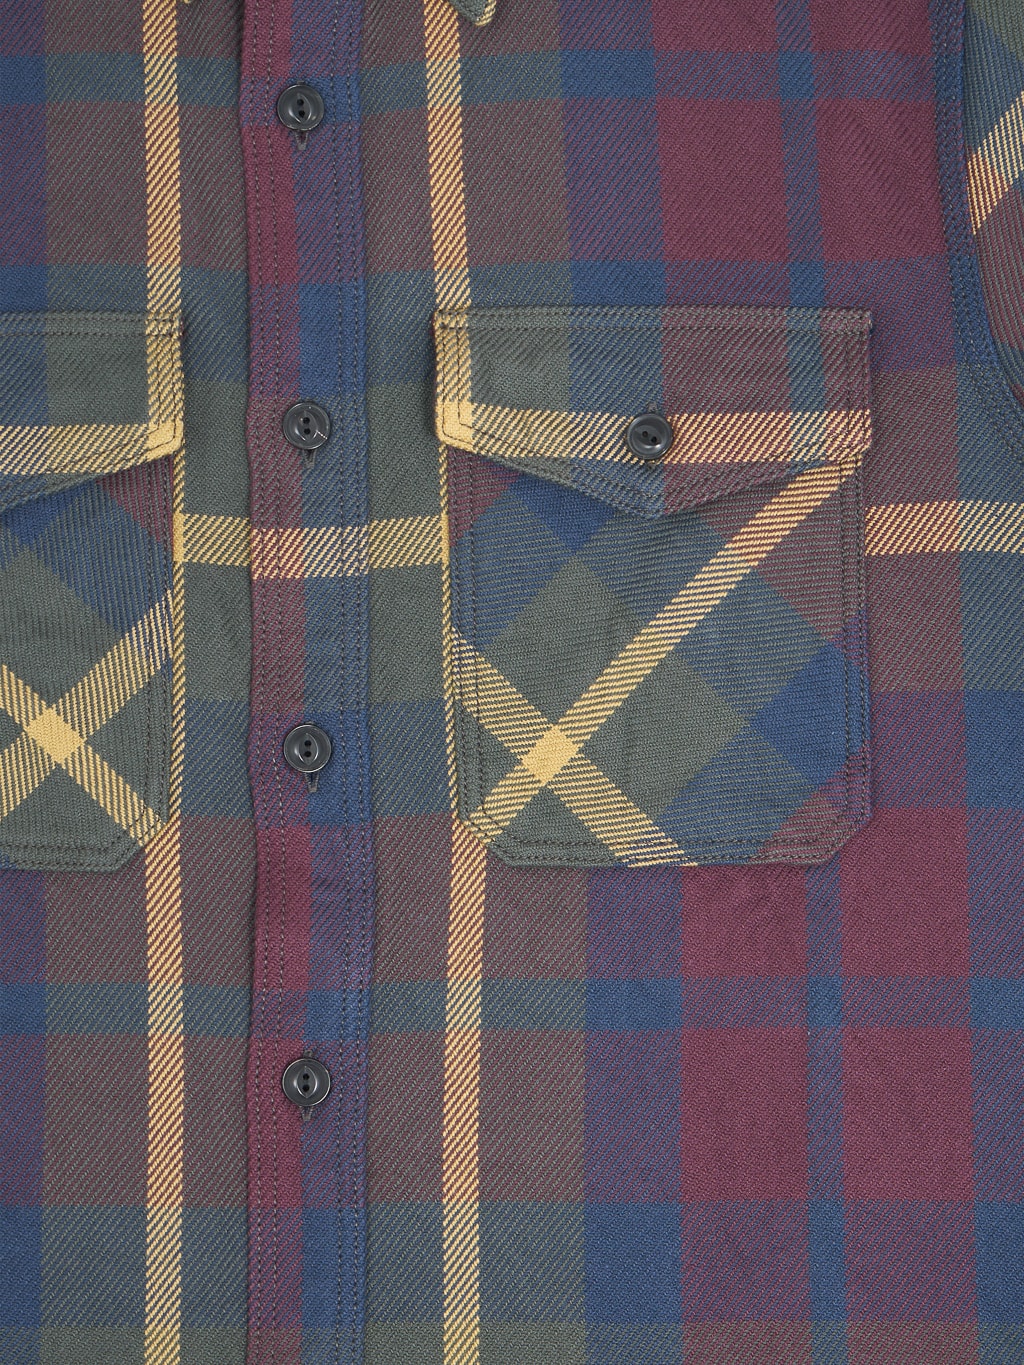 UES Extra Heavy Flannel Shirt wine pockets closeup